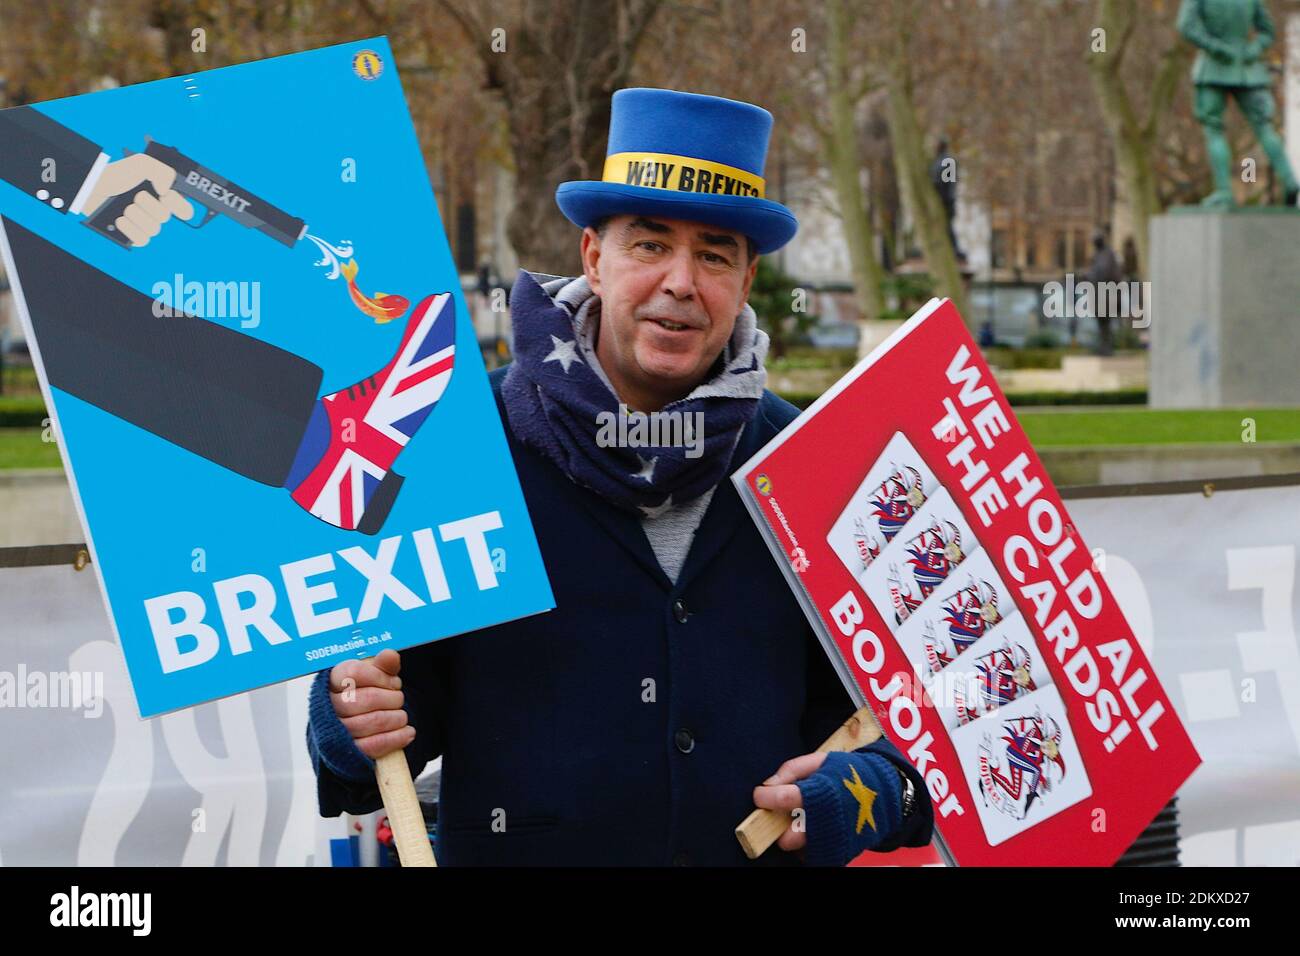 Westminster, London, UK. 16 December, 2020. A few protesters with placards gather outside Westminster including Steve Bray. Photo Credit: PAL Media/Alamy Live News Stock Photo